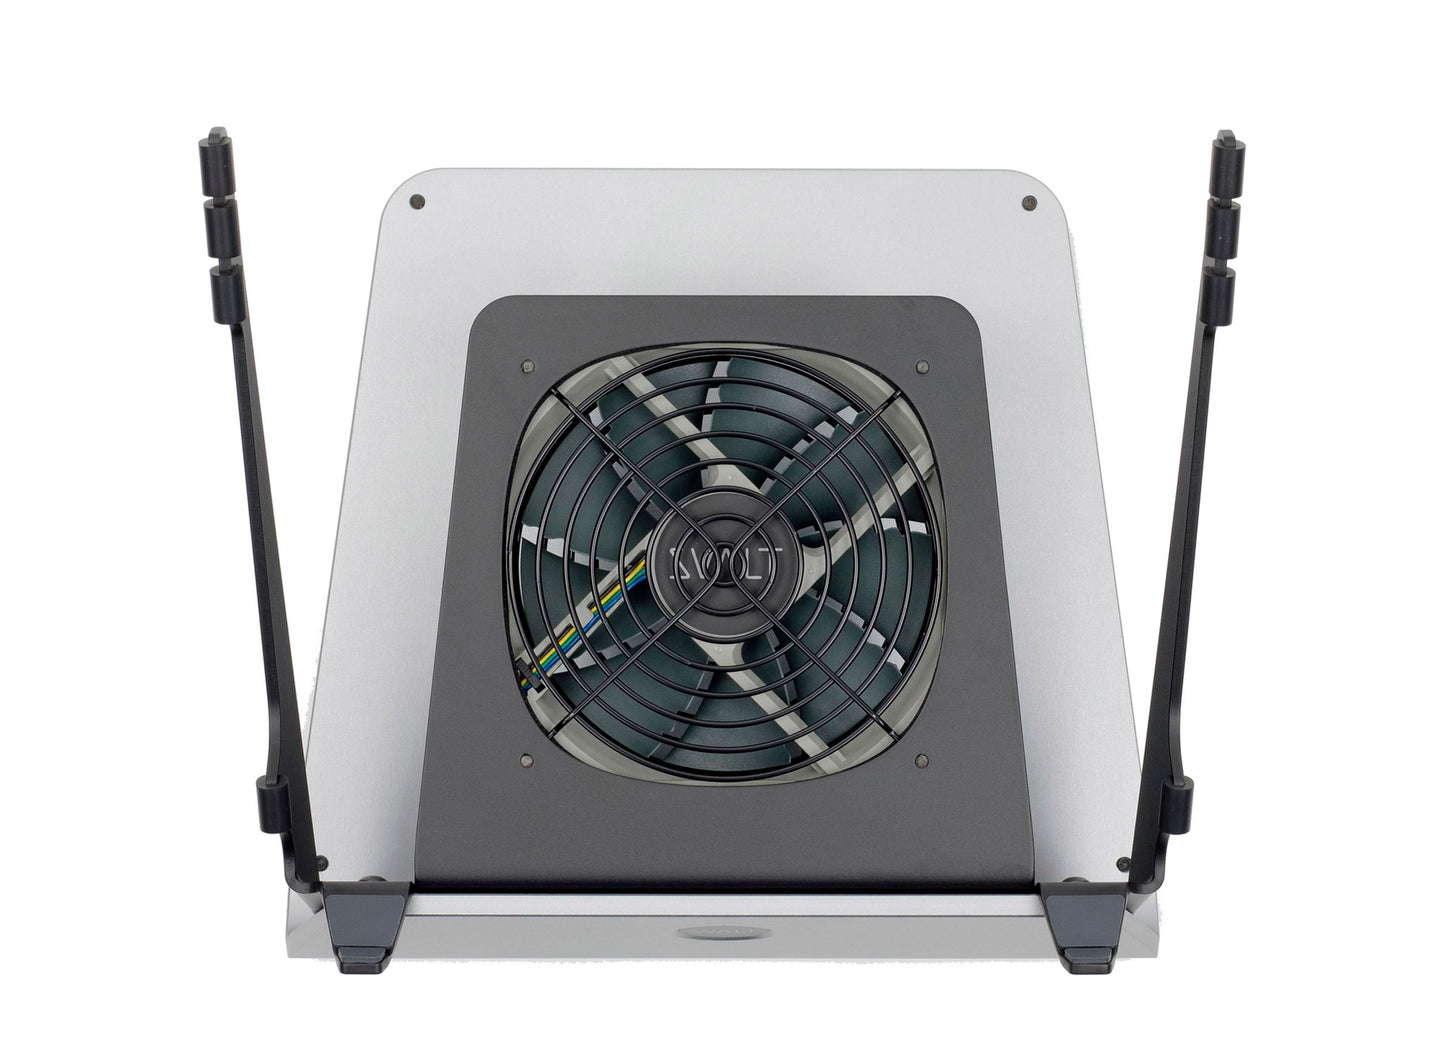 SVALT Cooling Stand model SxG17 gray top view for quiet fan cooling performance with Apple and PC laptops